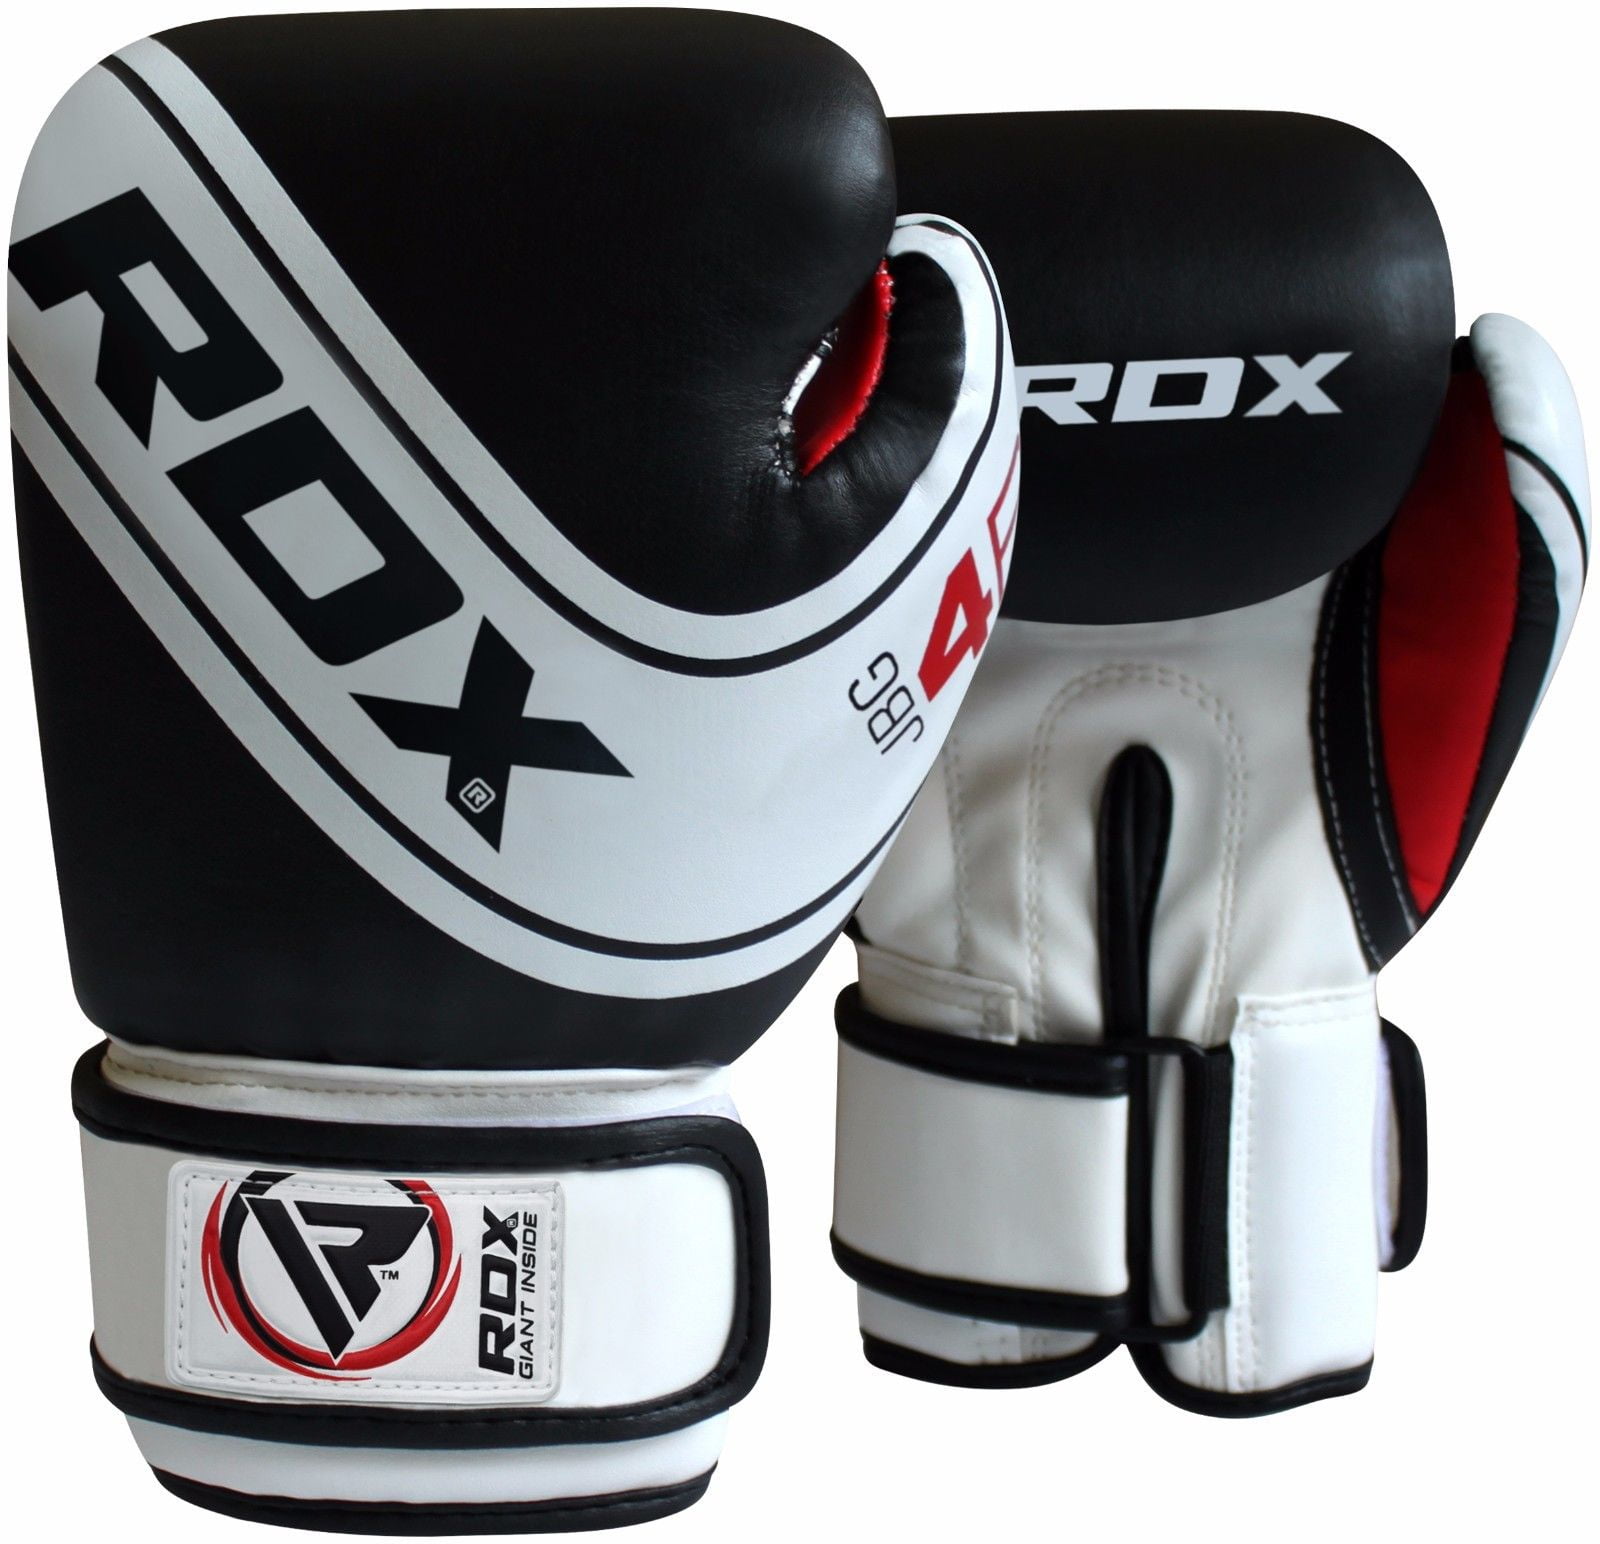 KIDS BOXING GLOVES PUNCH BAG JUNIOR MITTS & FOCUS PADS HAND WRAP TRAINING SET 4 